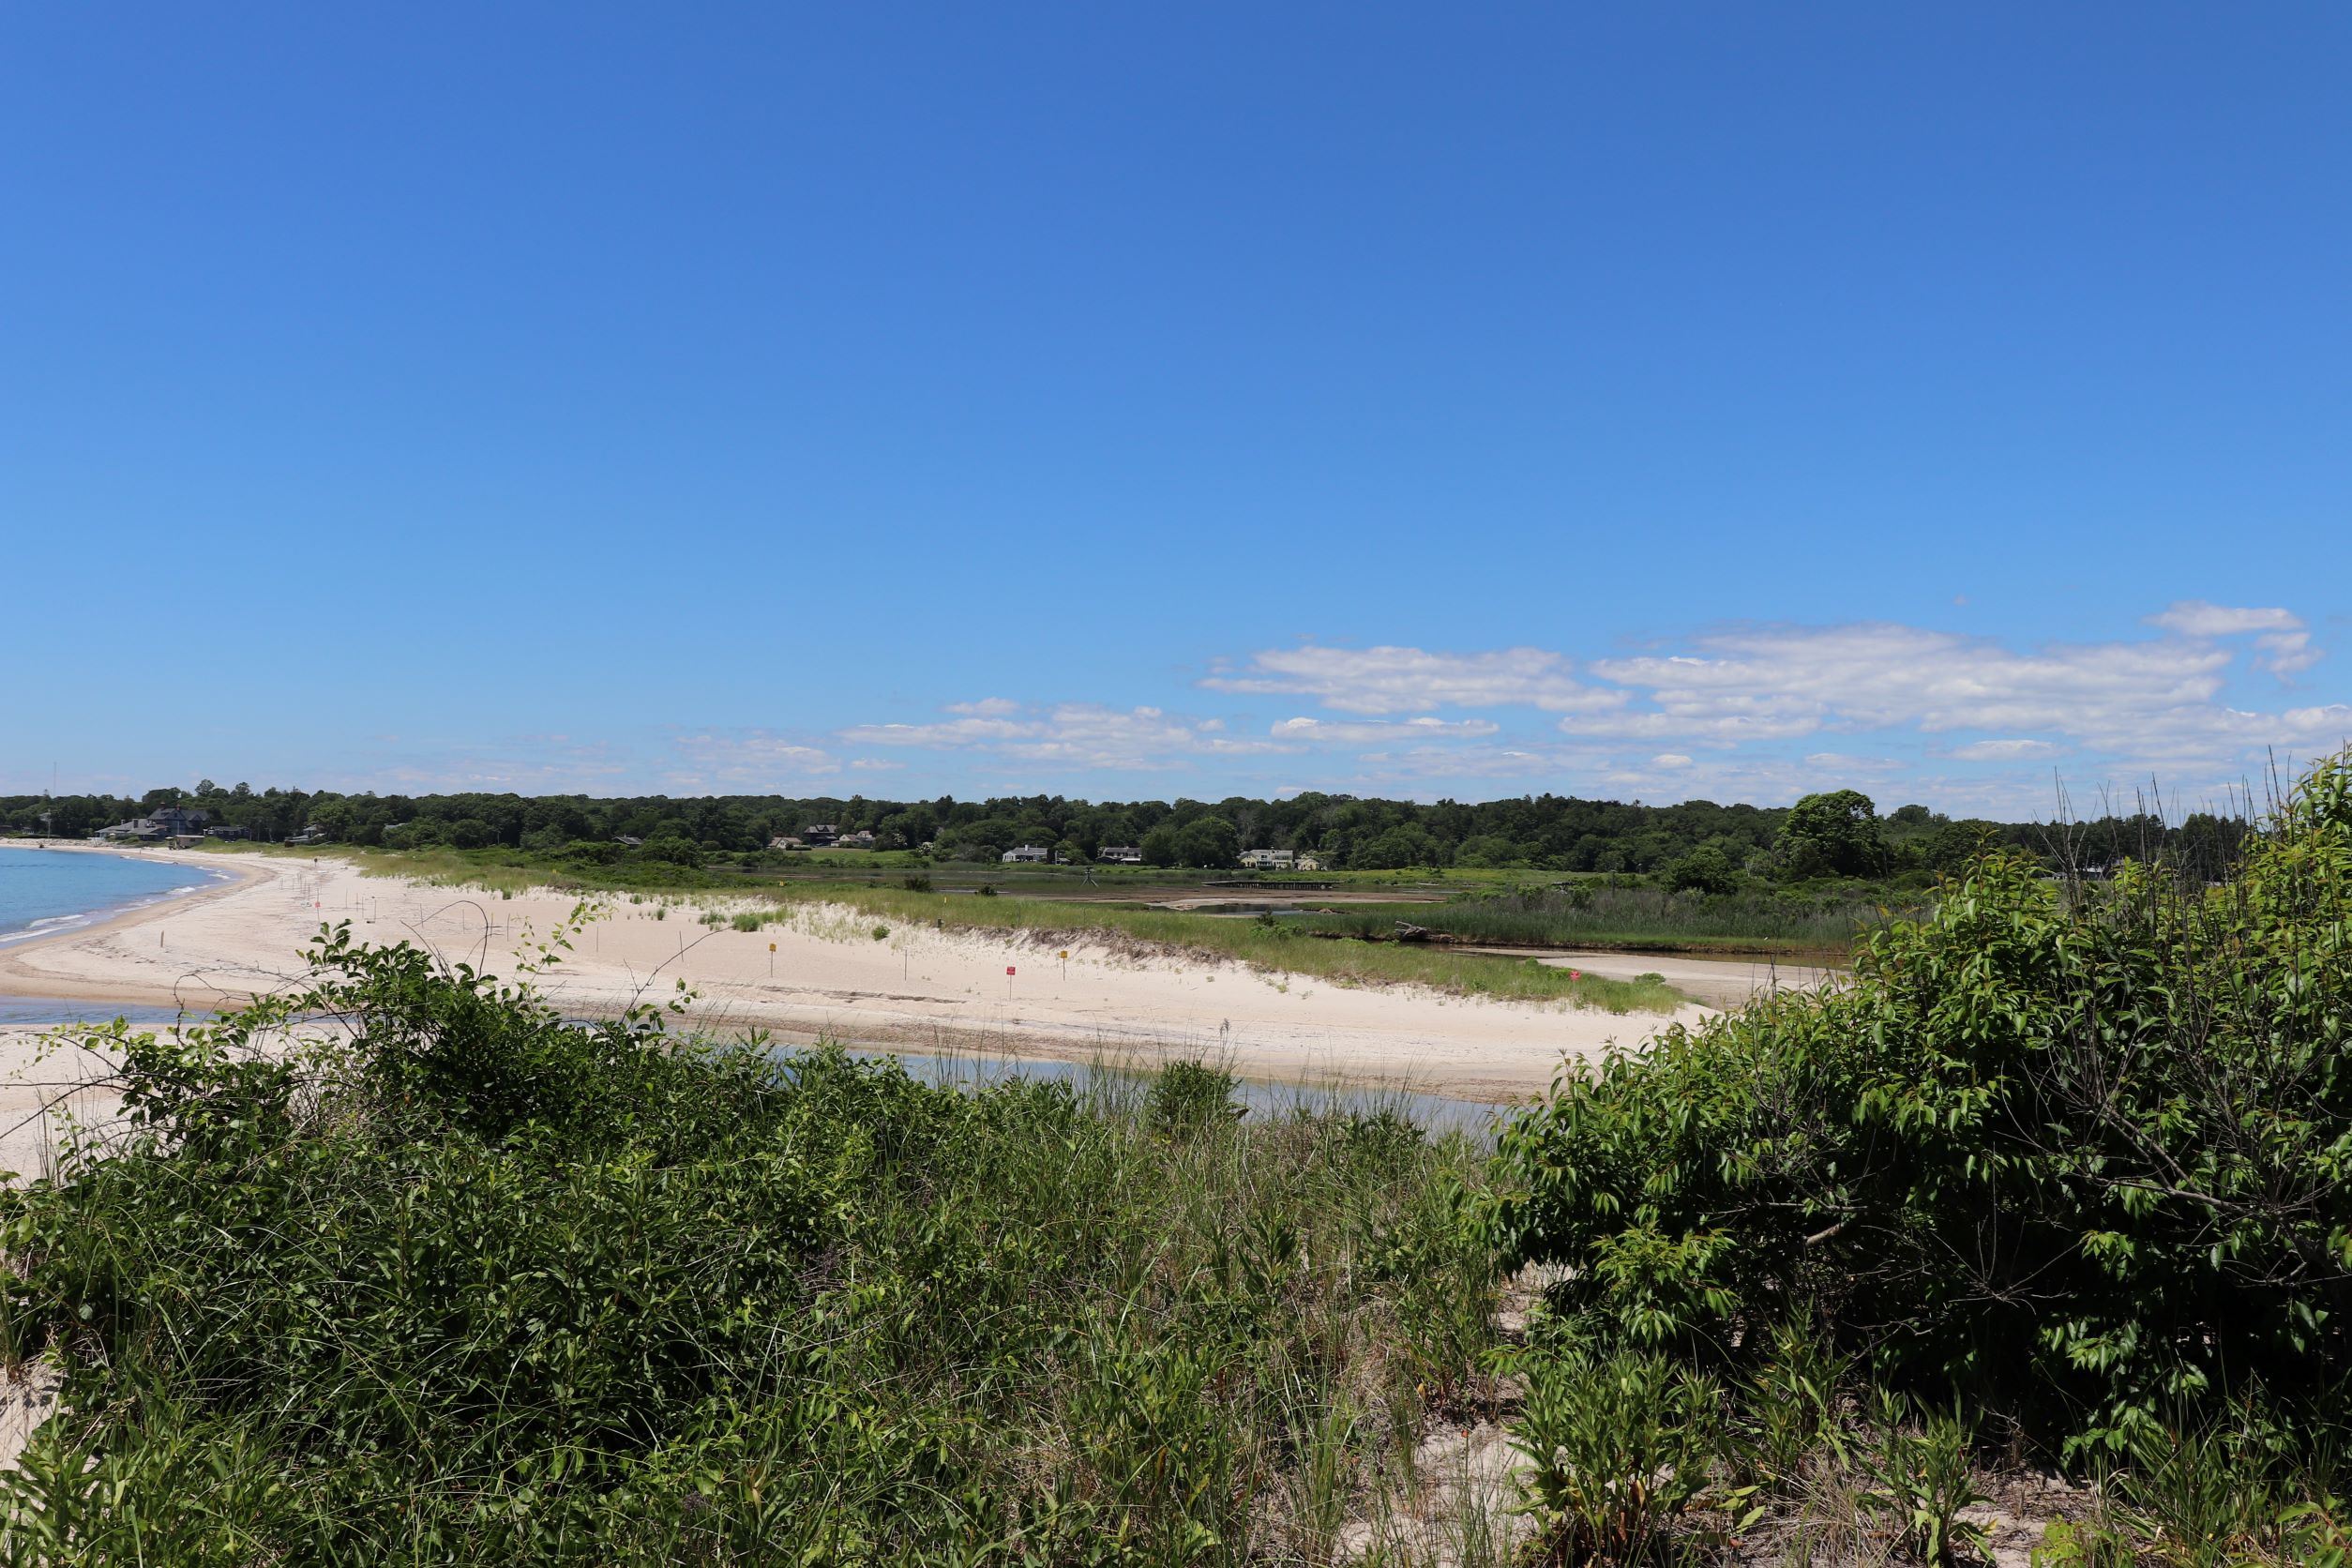 Image of beach and sand dunes at harkness park in waterford ct.